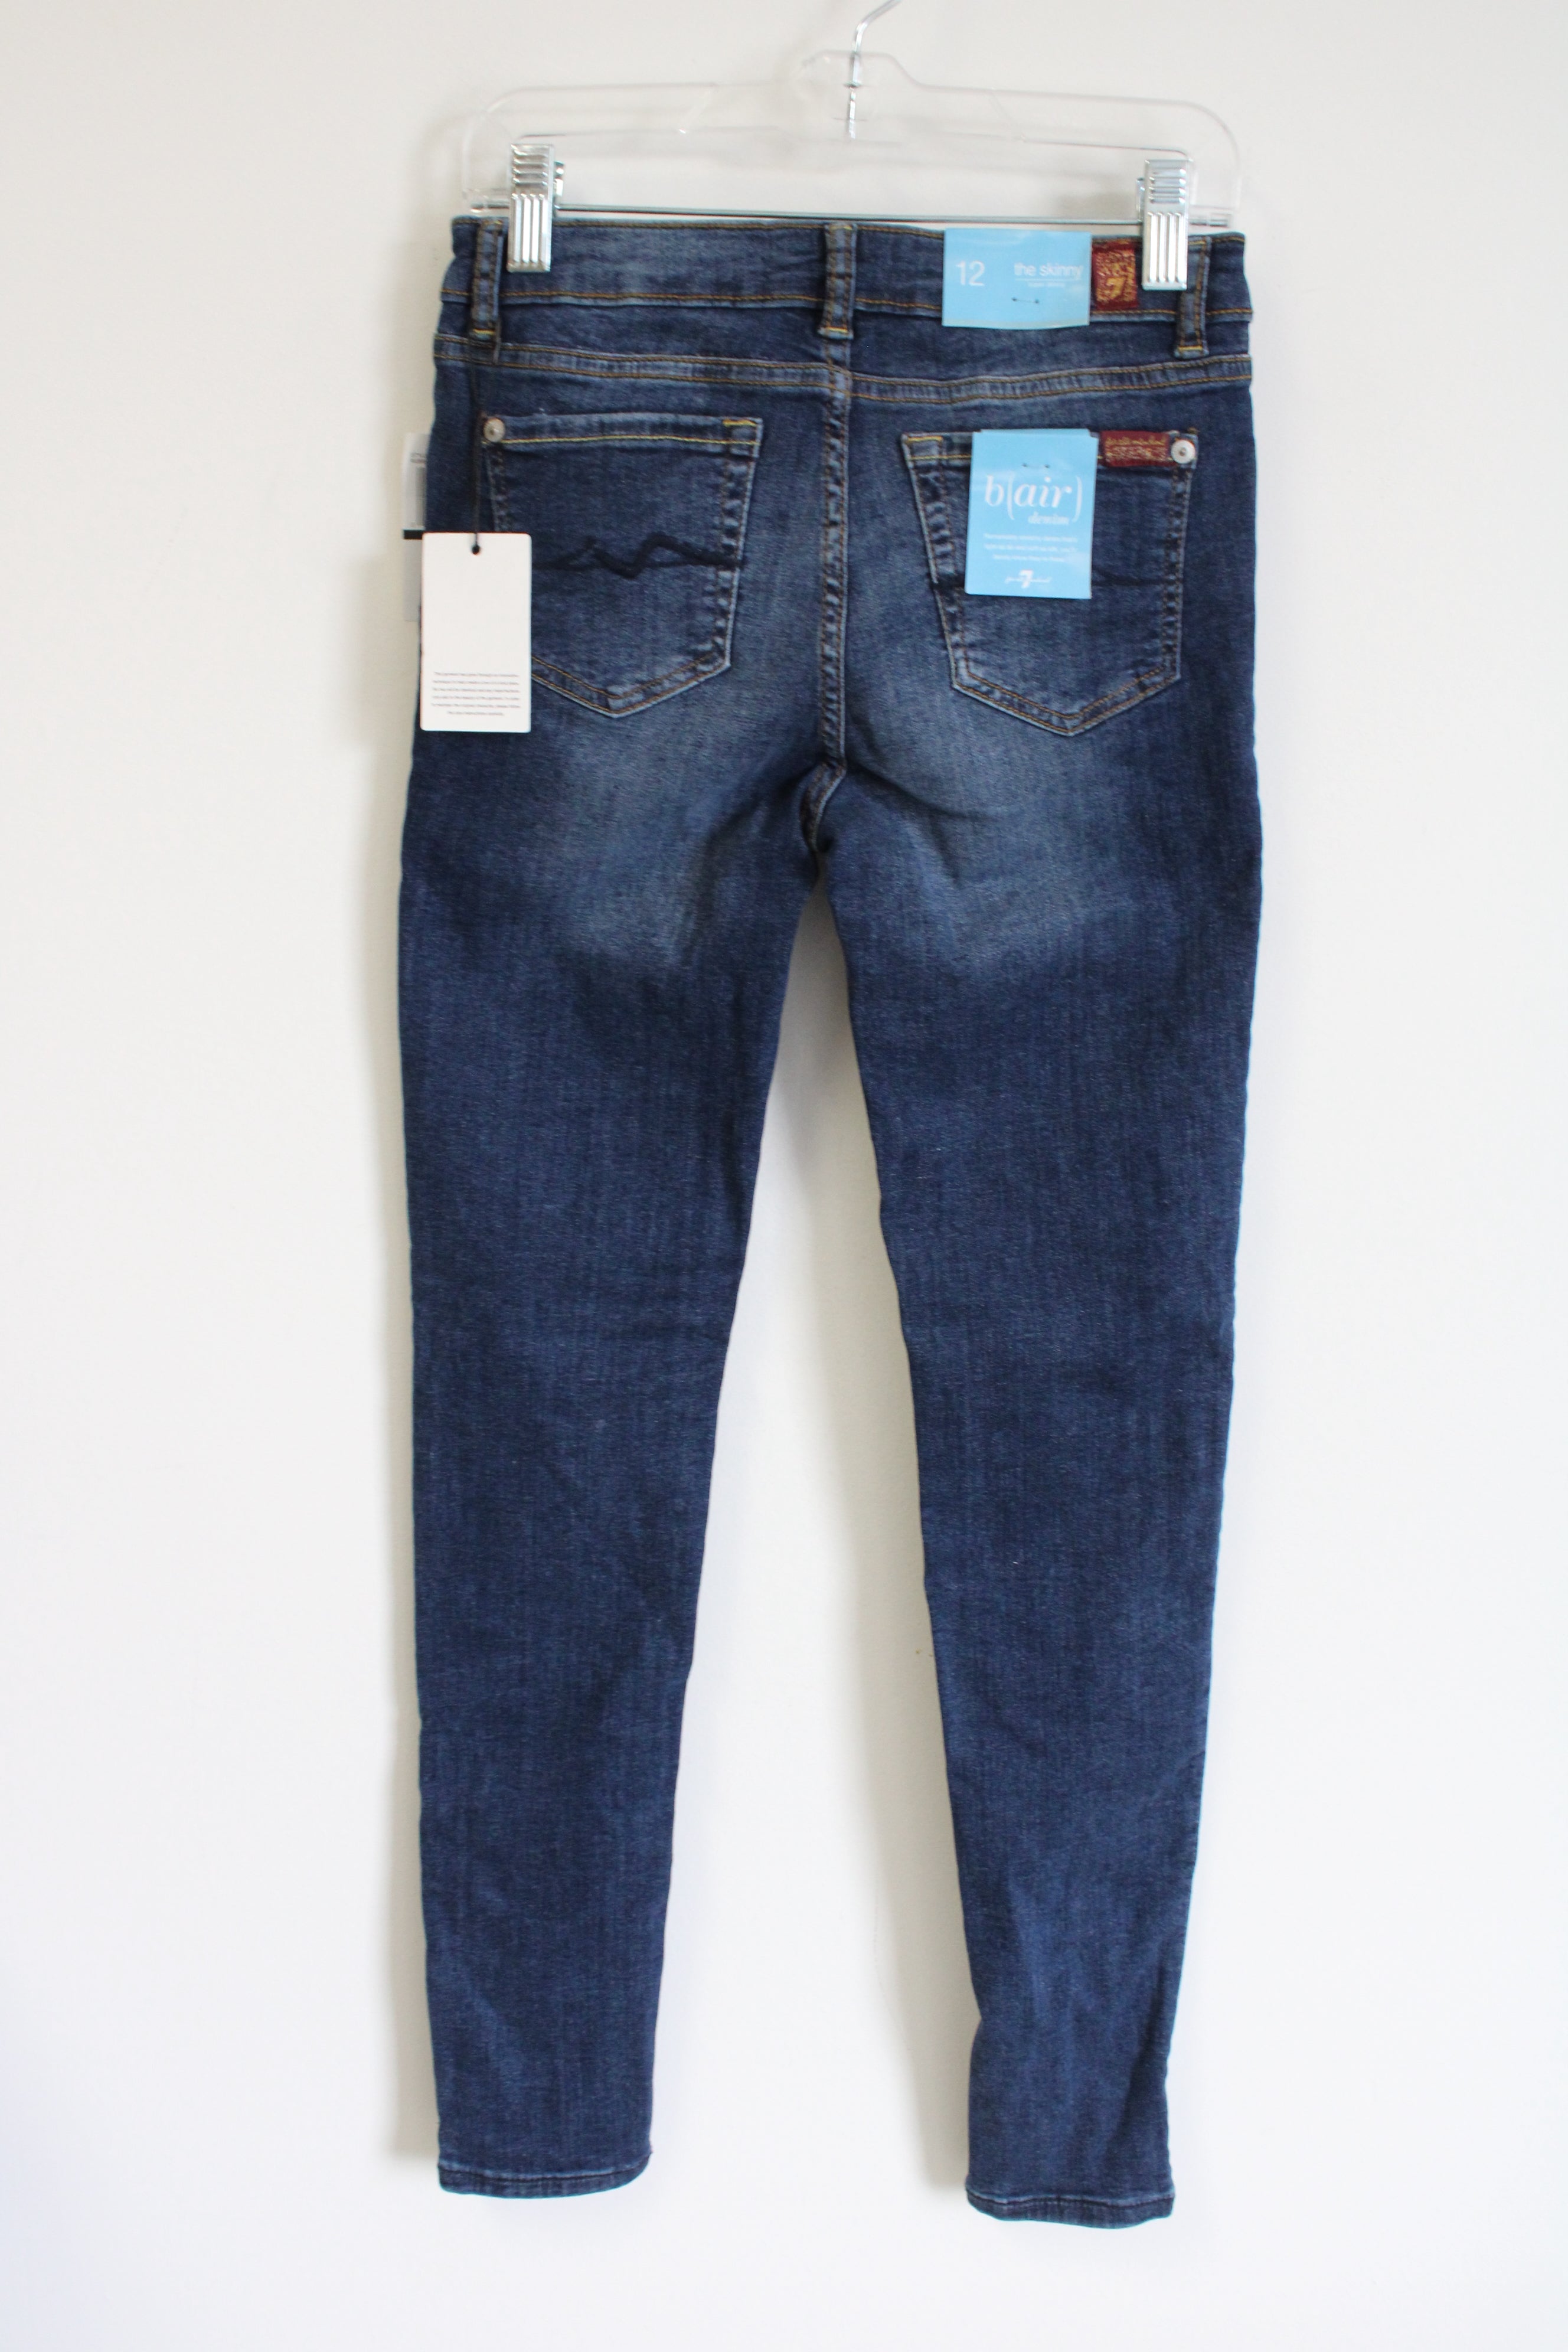 NEW Blair Denim 7 For All Mankind The Skinny Jeans | Youth 12